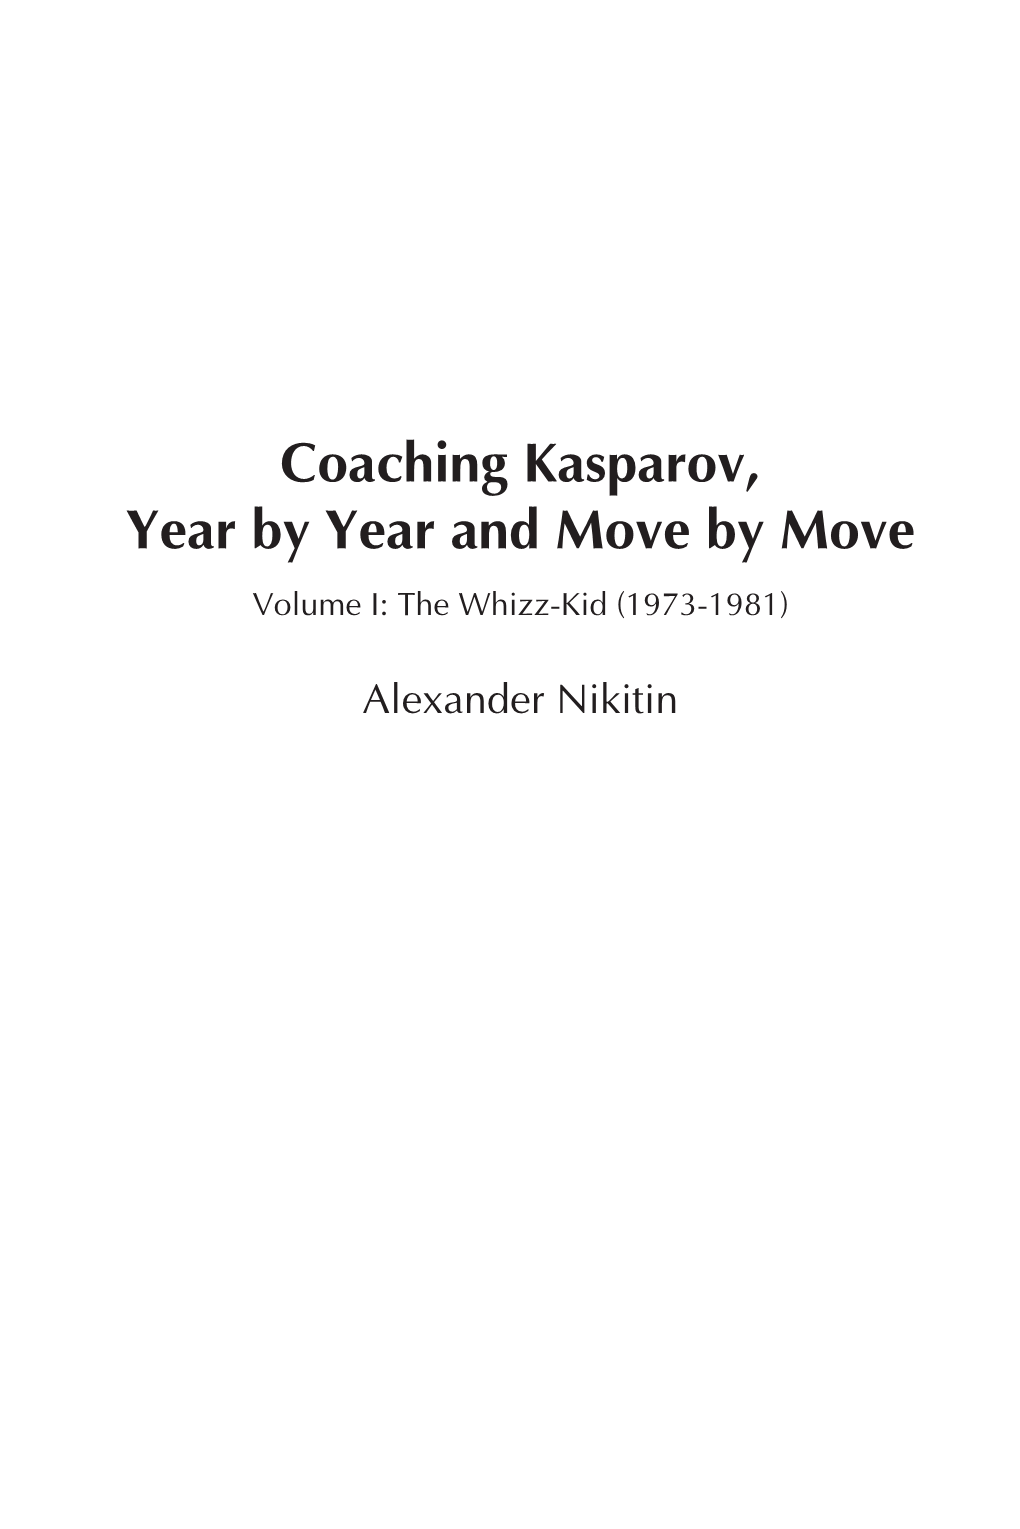 Coaching Kasparov, Year by Year and Move by Move Volume I: the Whizz-Kid (1973-1981)